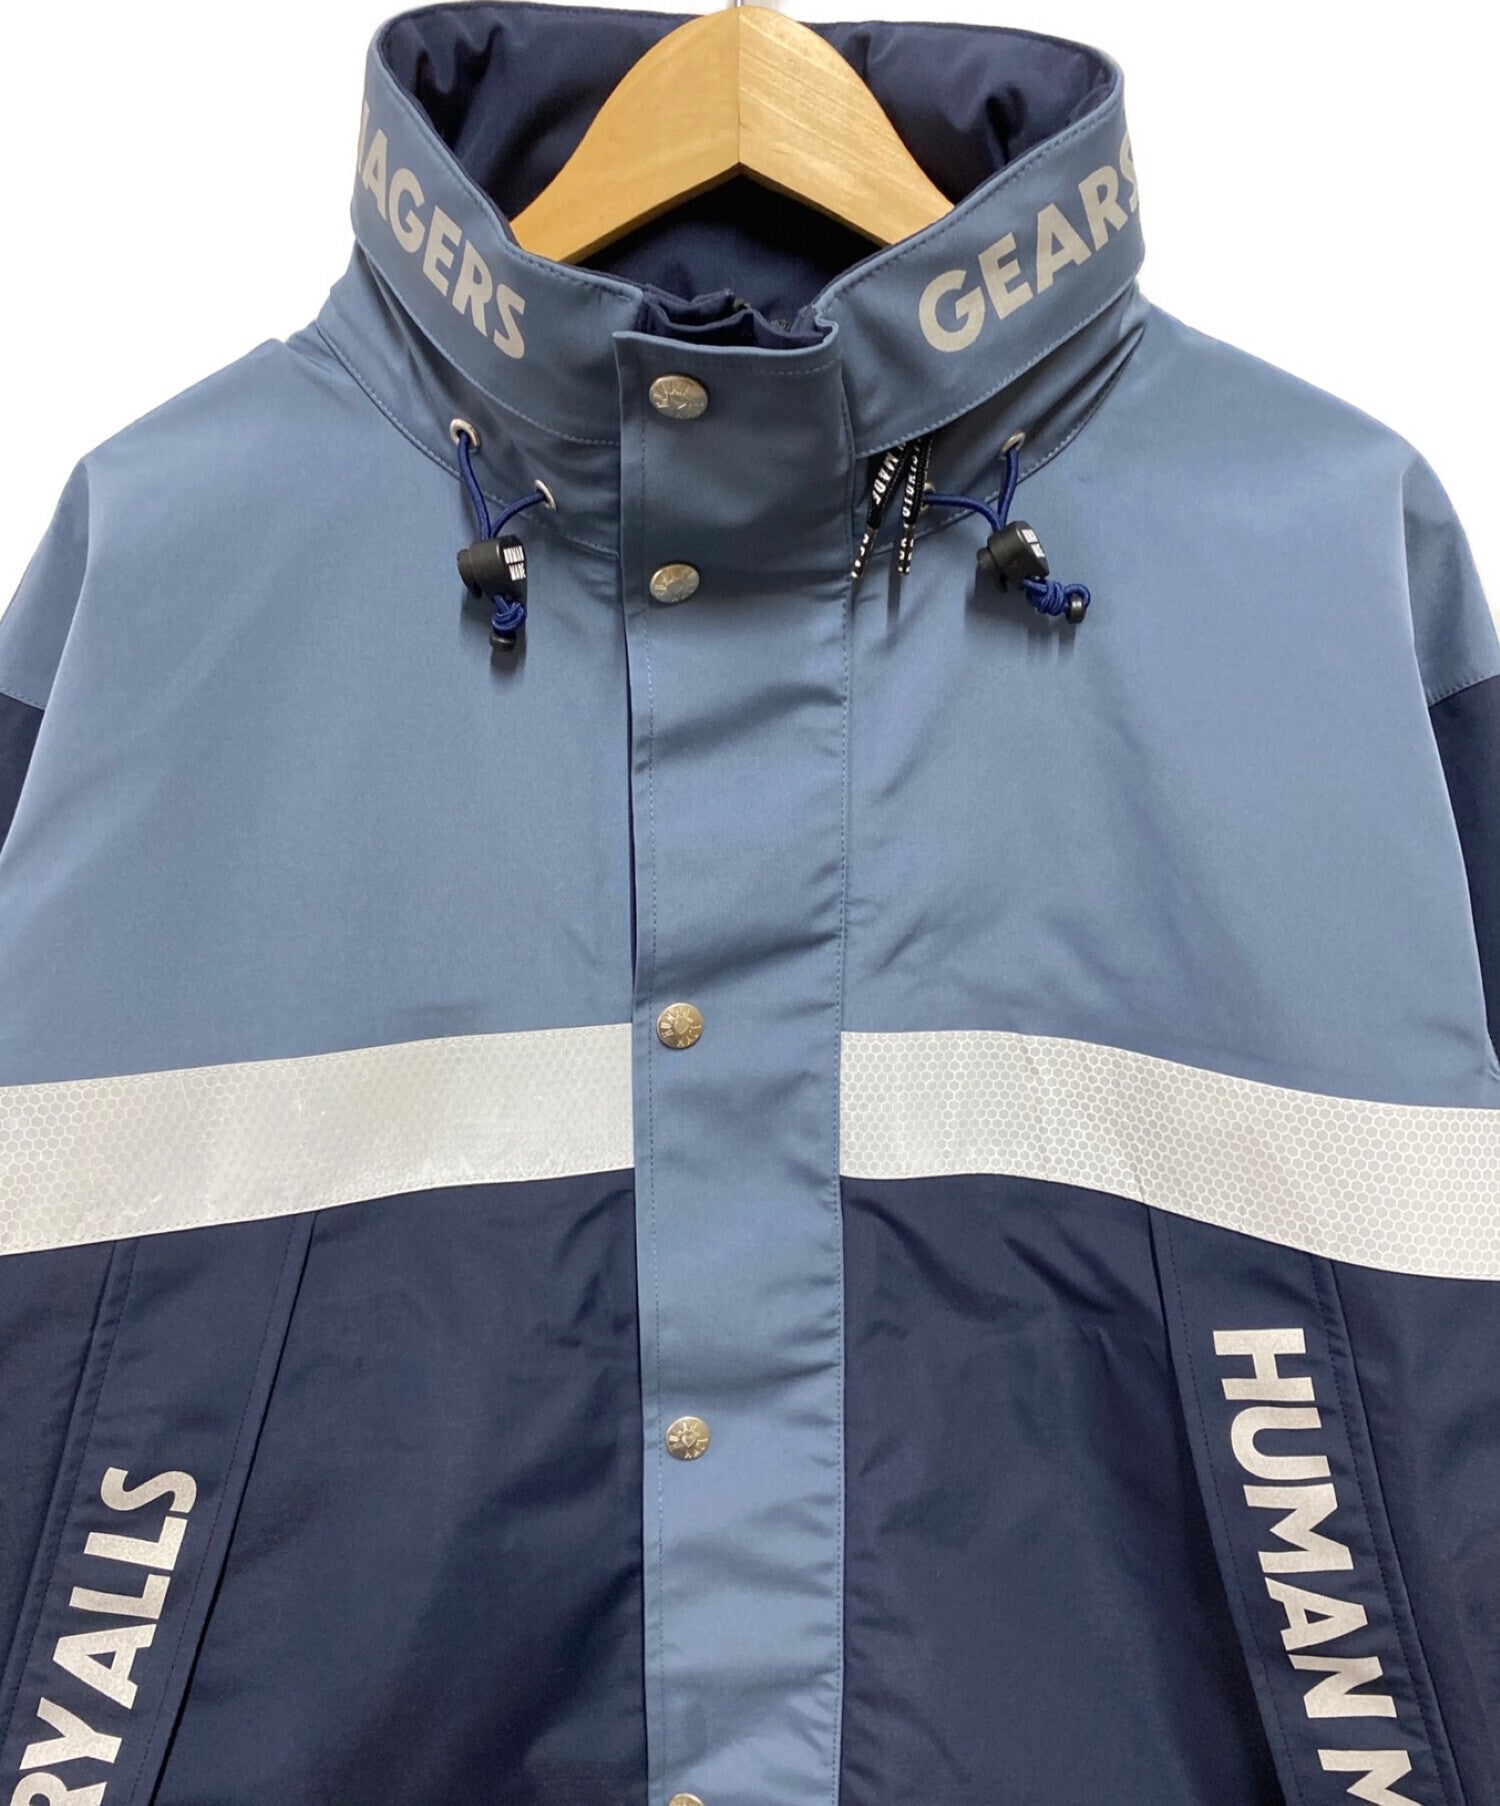 Archive Factory Human Made Fire Jacket